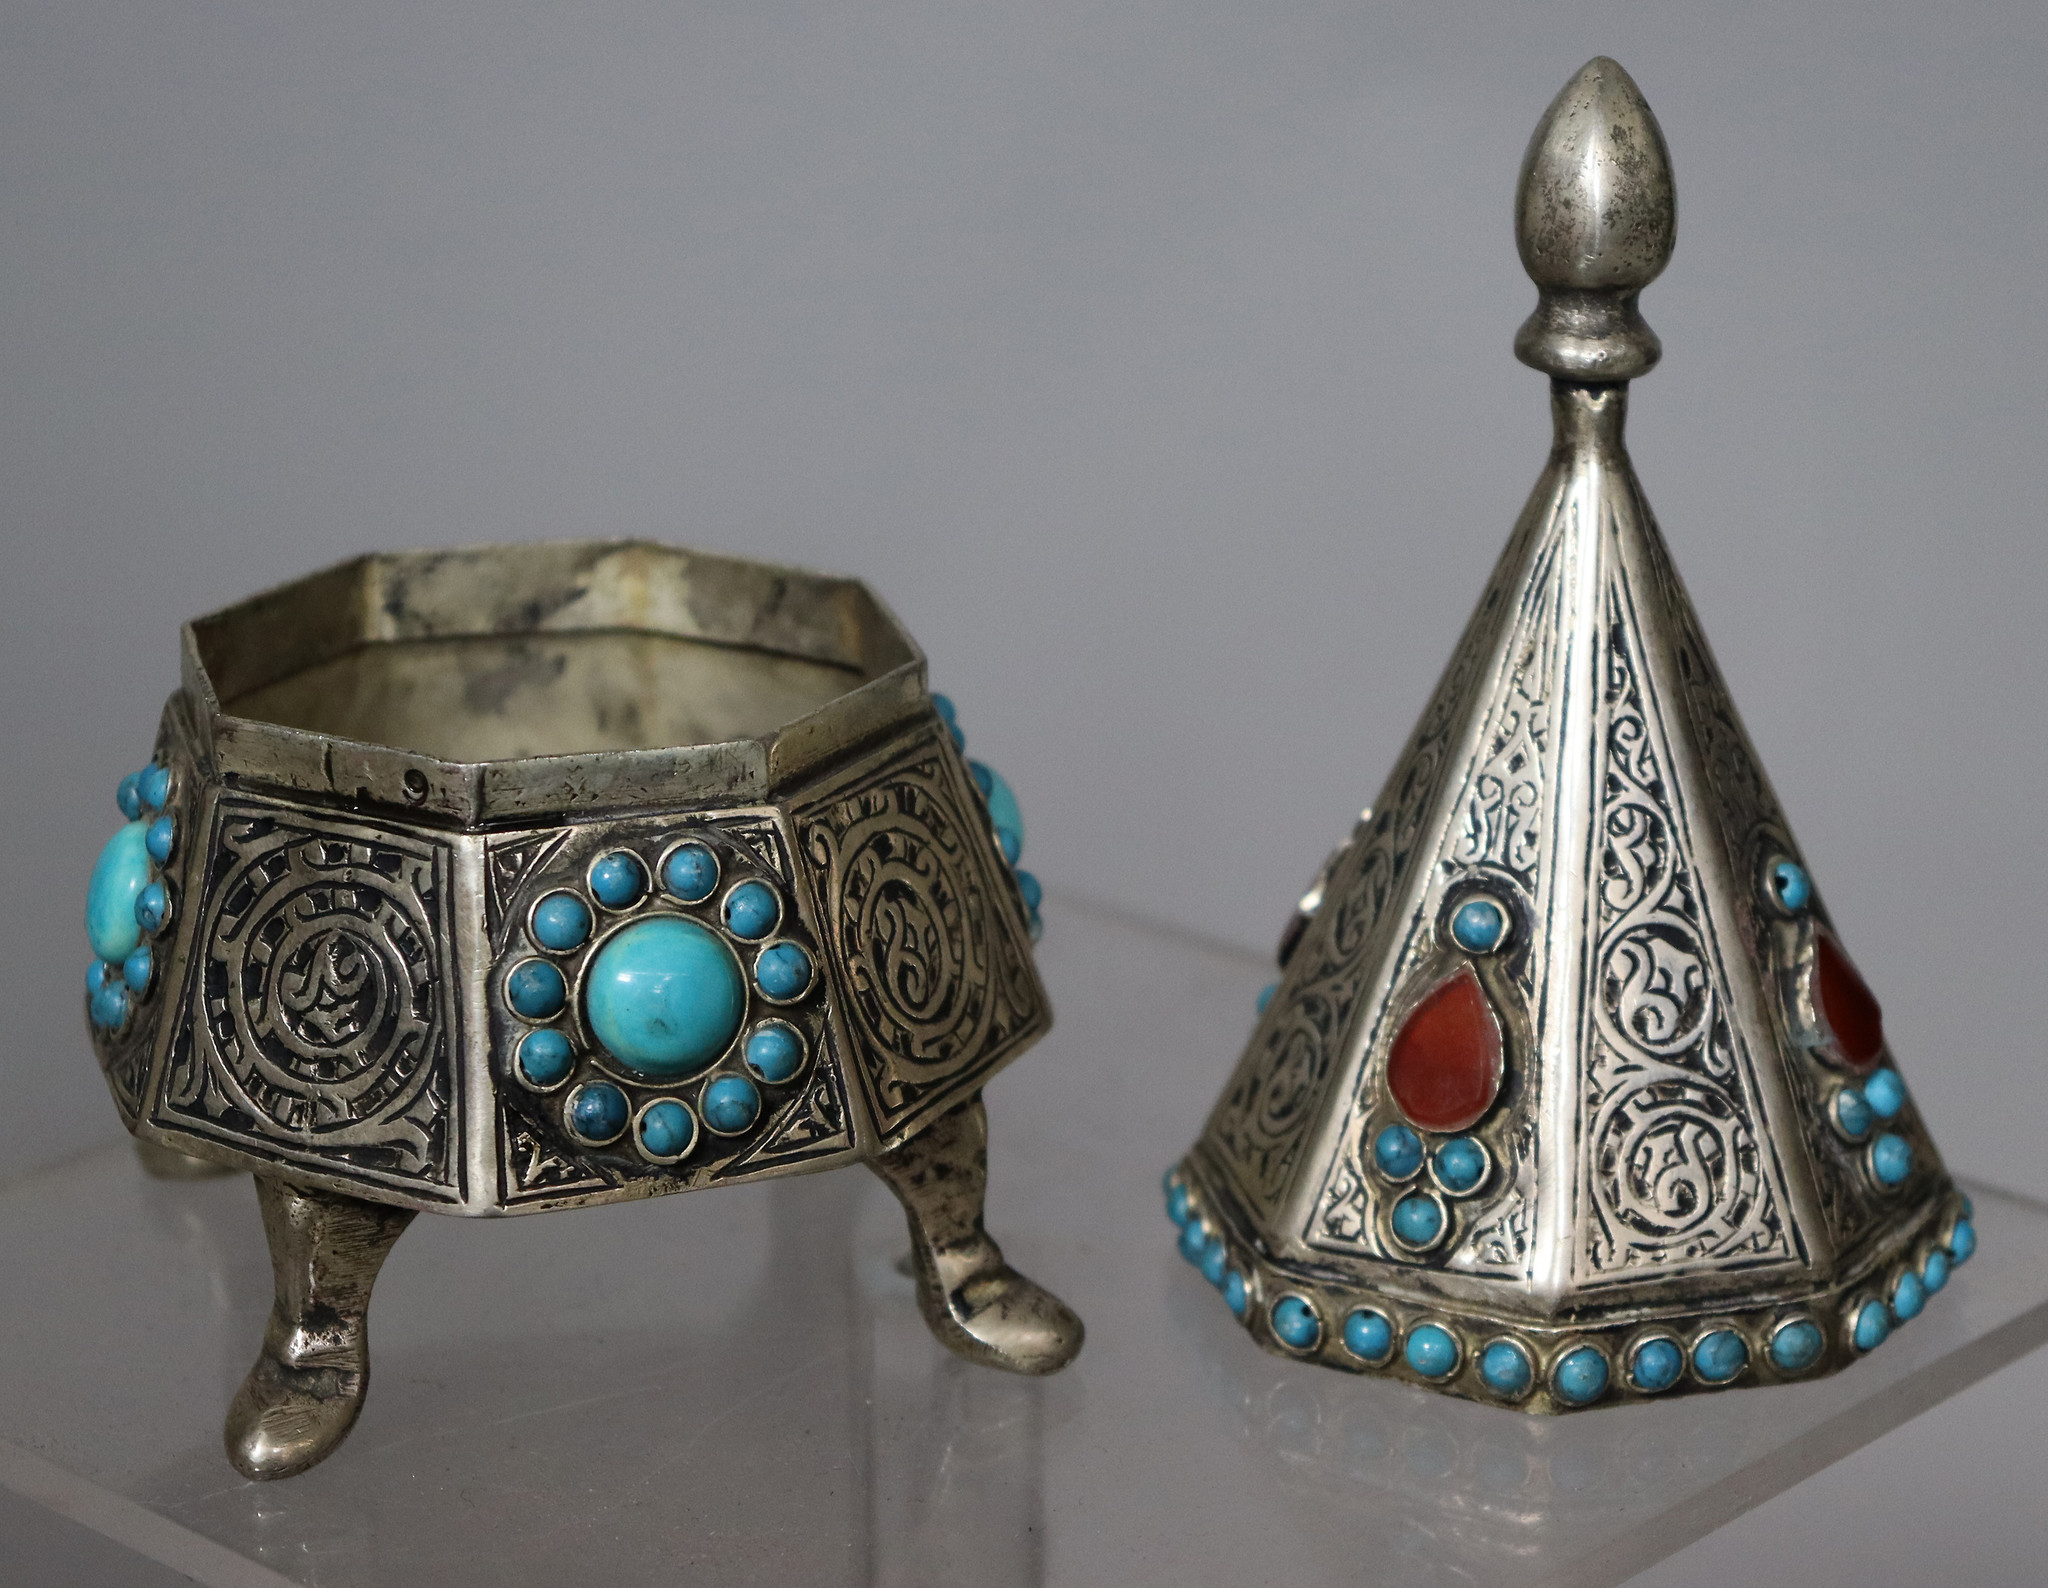 nickel silver box jewelry box casket Lidded Box / Bowl entree dishes Bowl Tureen With Lid  from Afghanistan pyramid 21/A